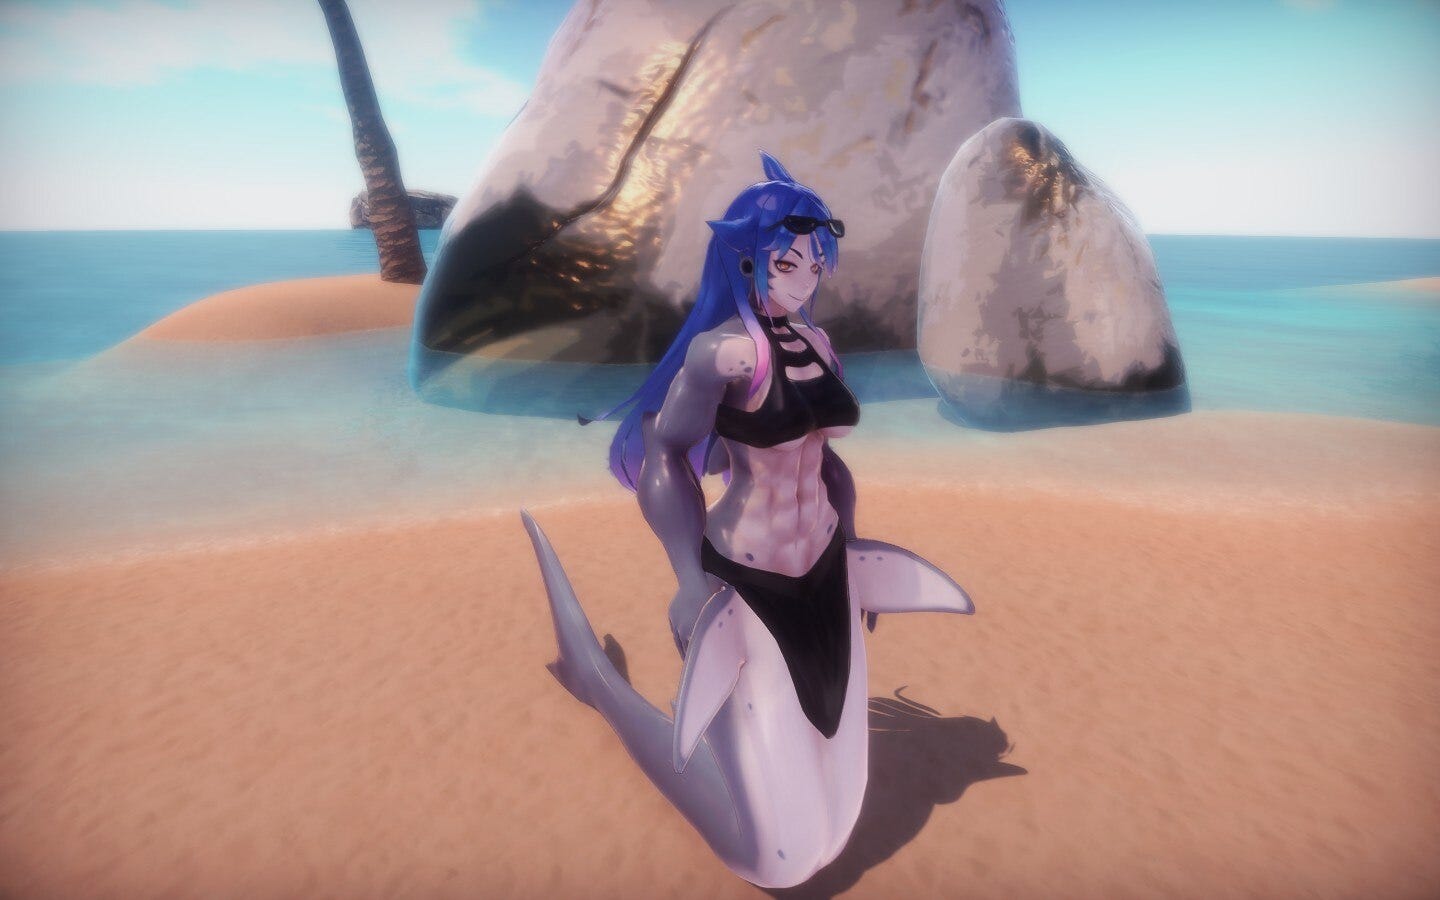 A shark girl on the beach looks smugly at the player